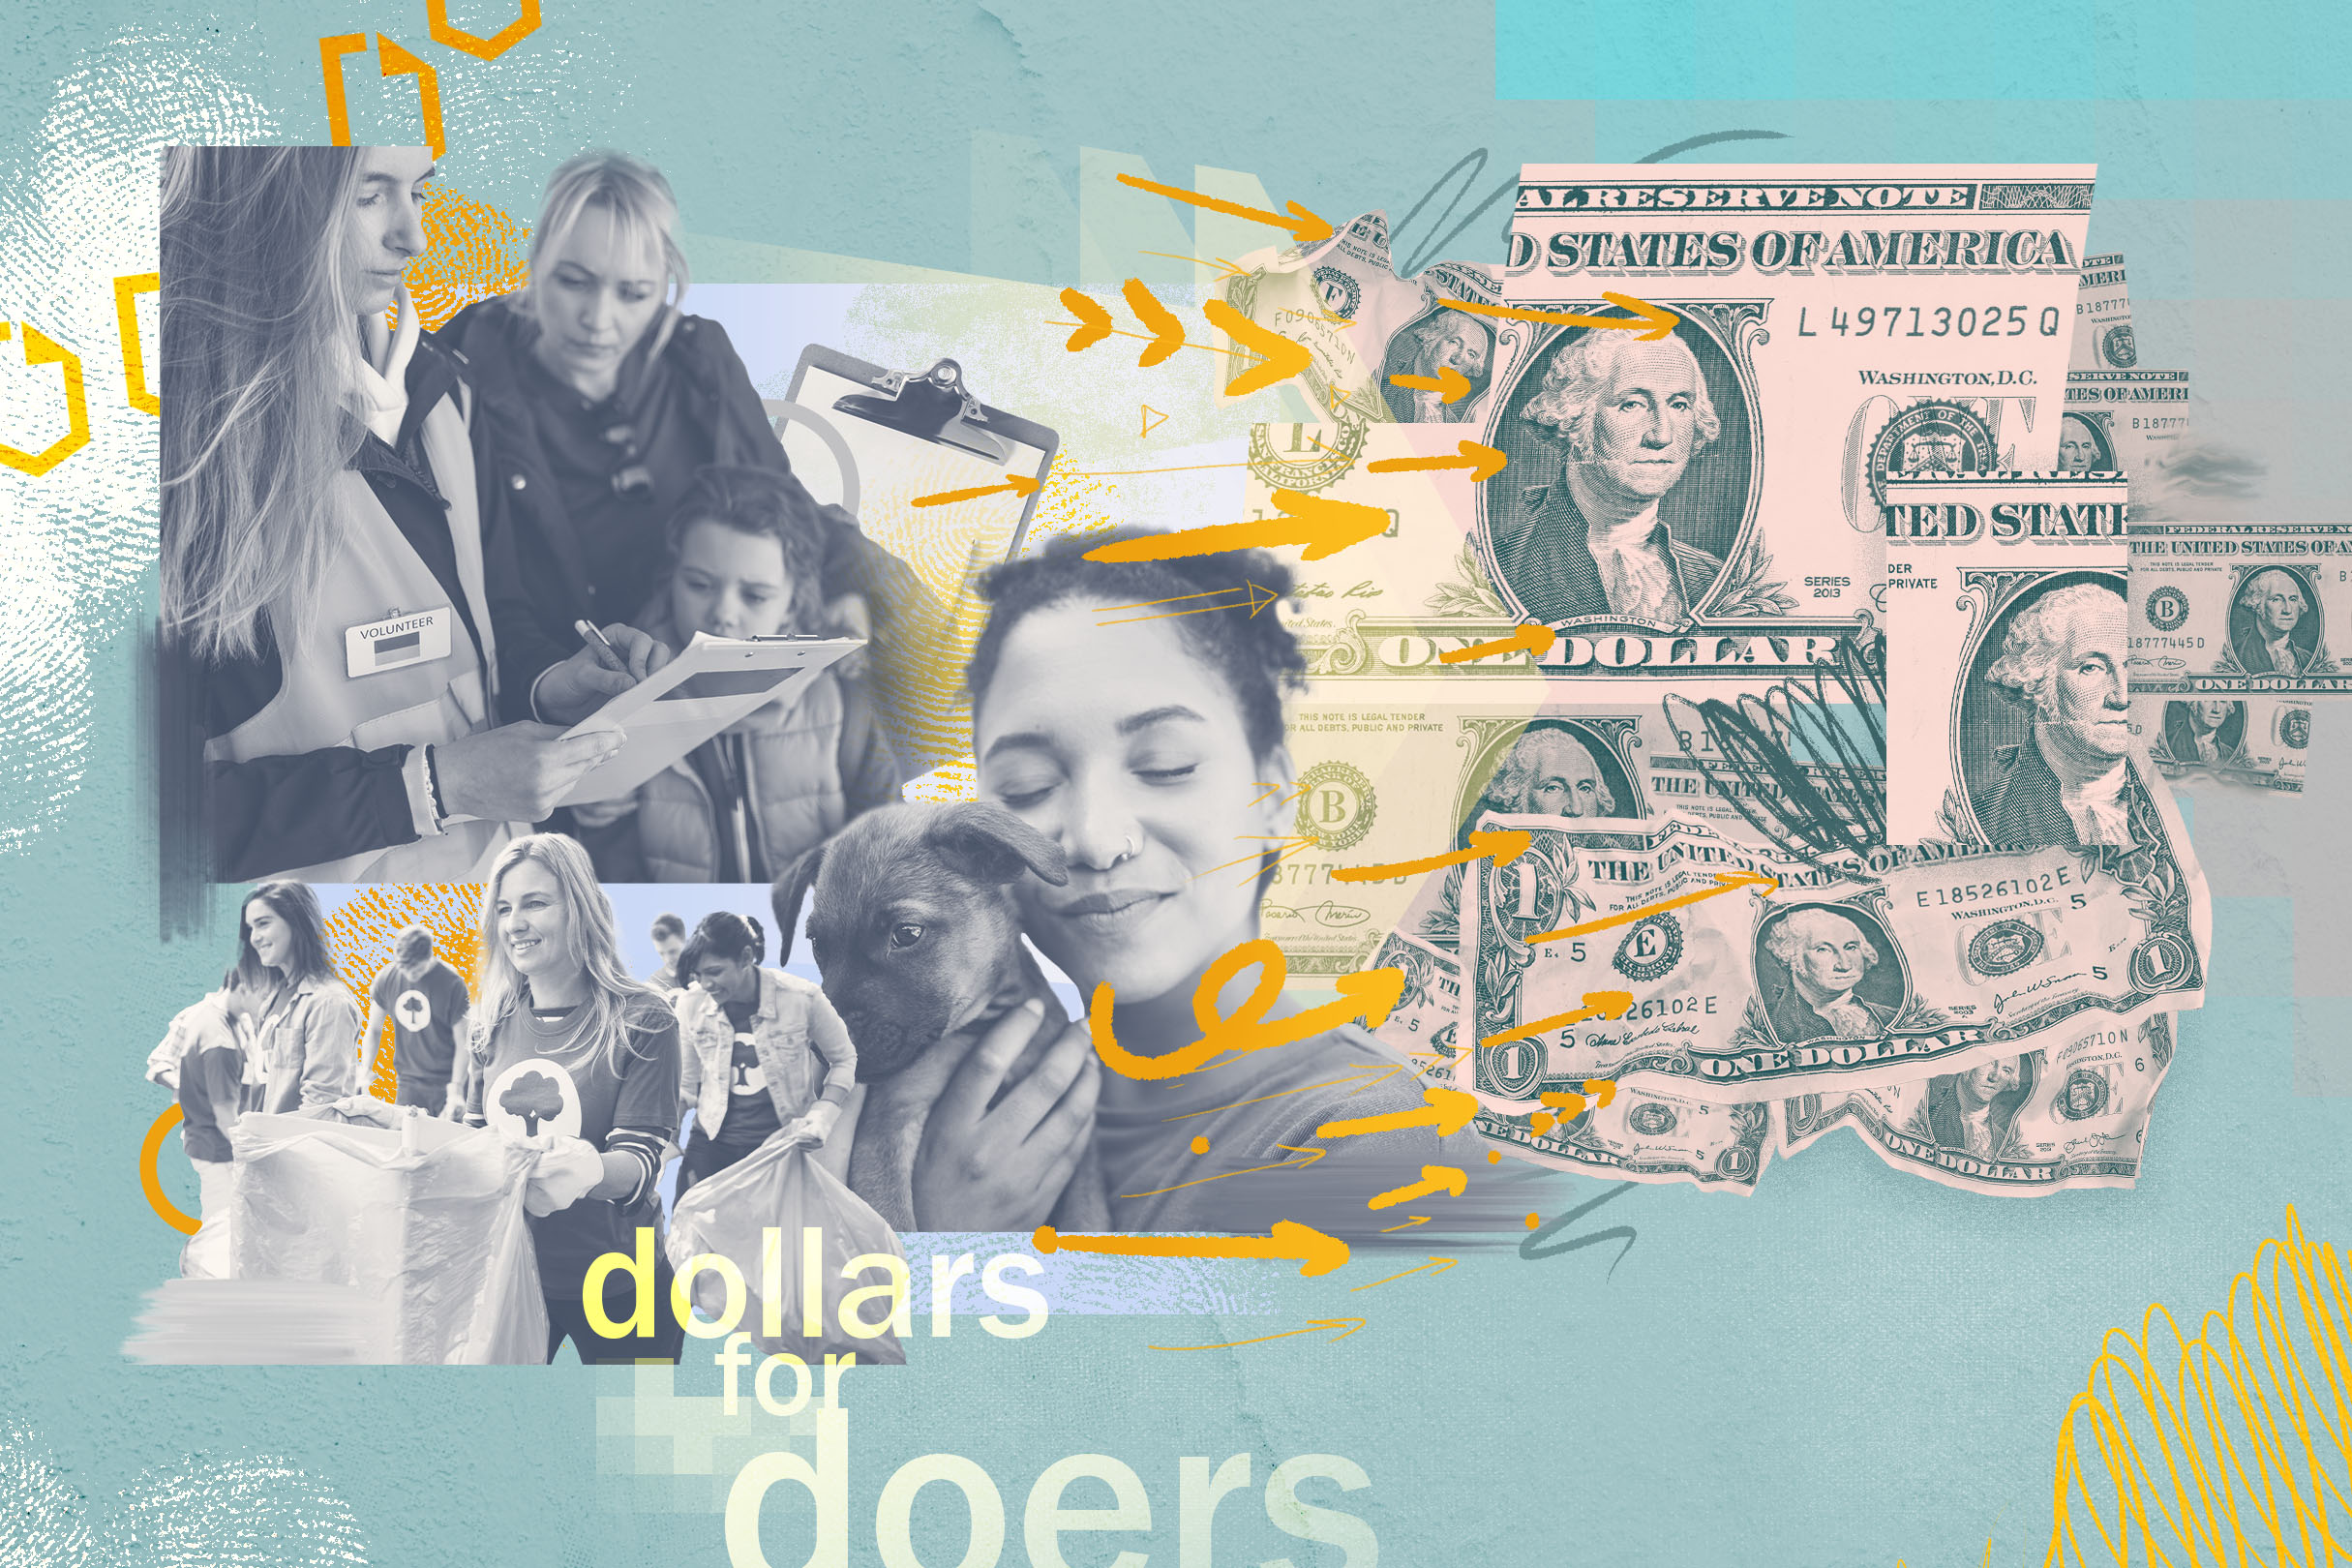 Feature image for the "Incentivize volunteering and multiply impact with Dollars for Doers" section